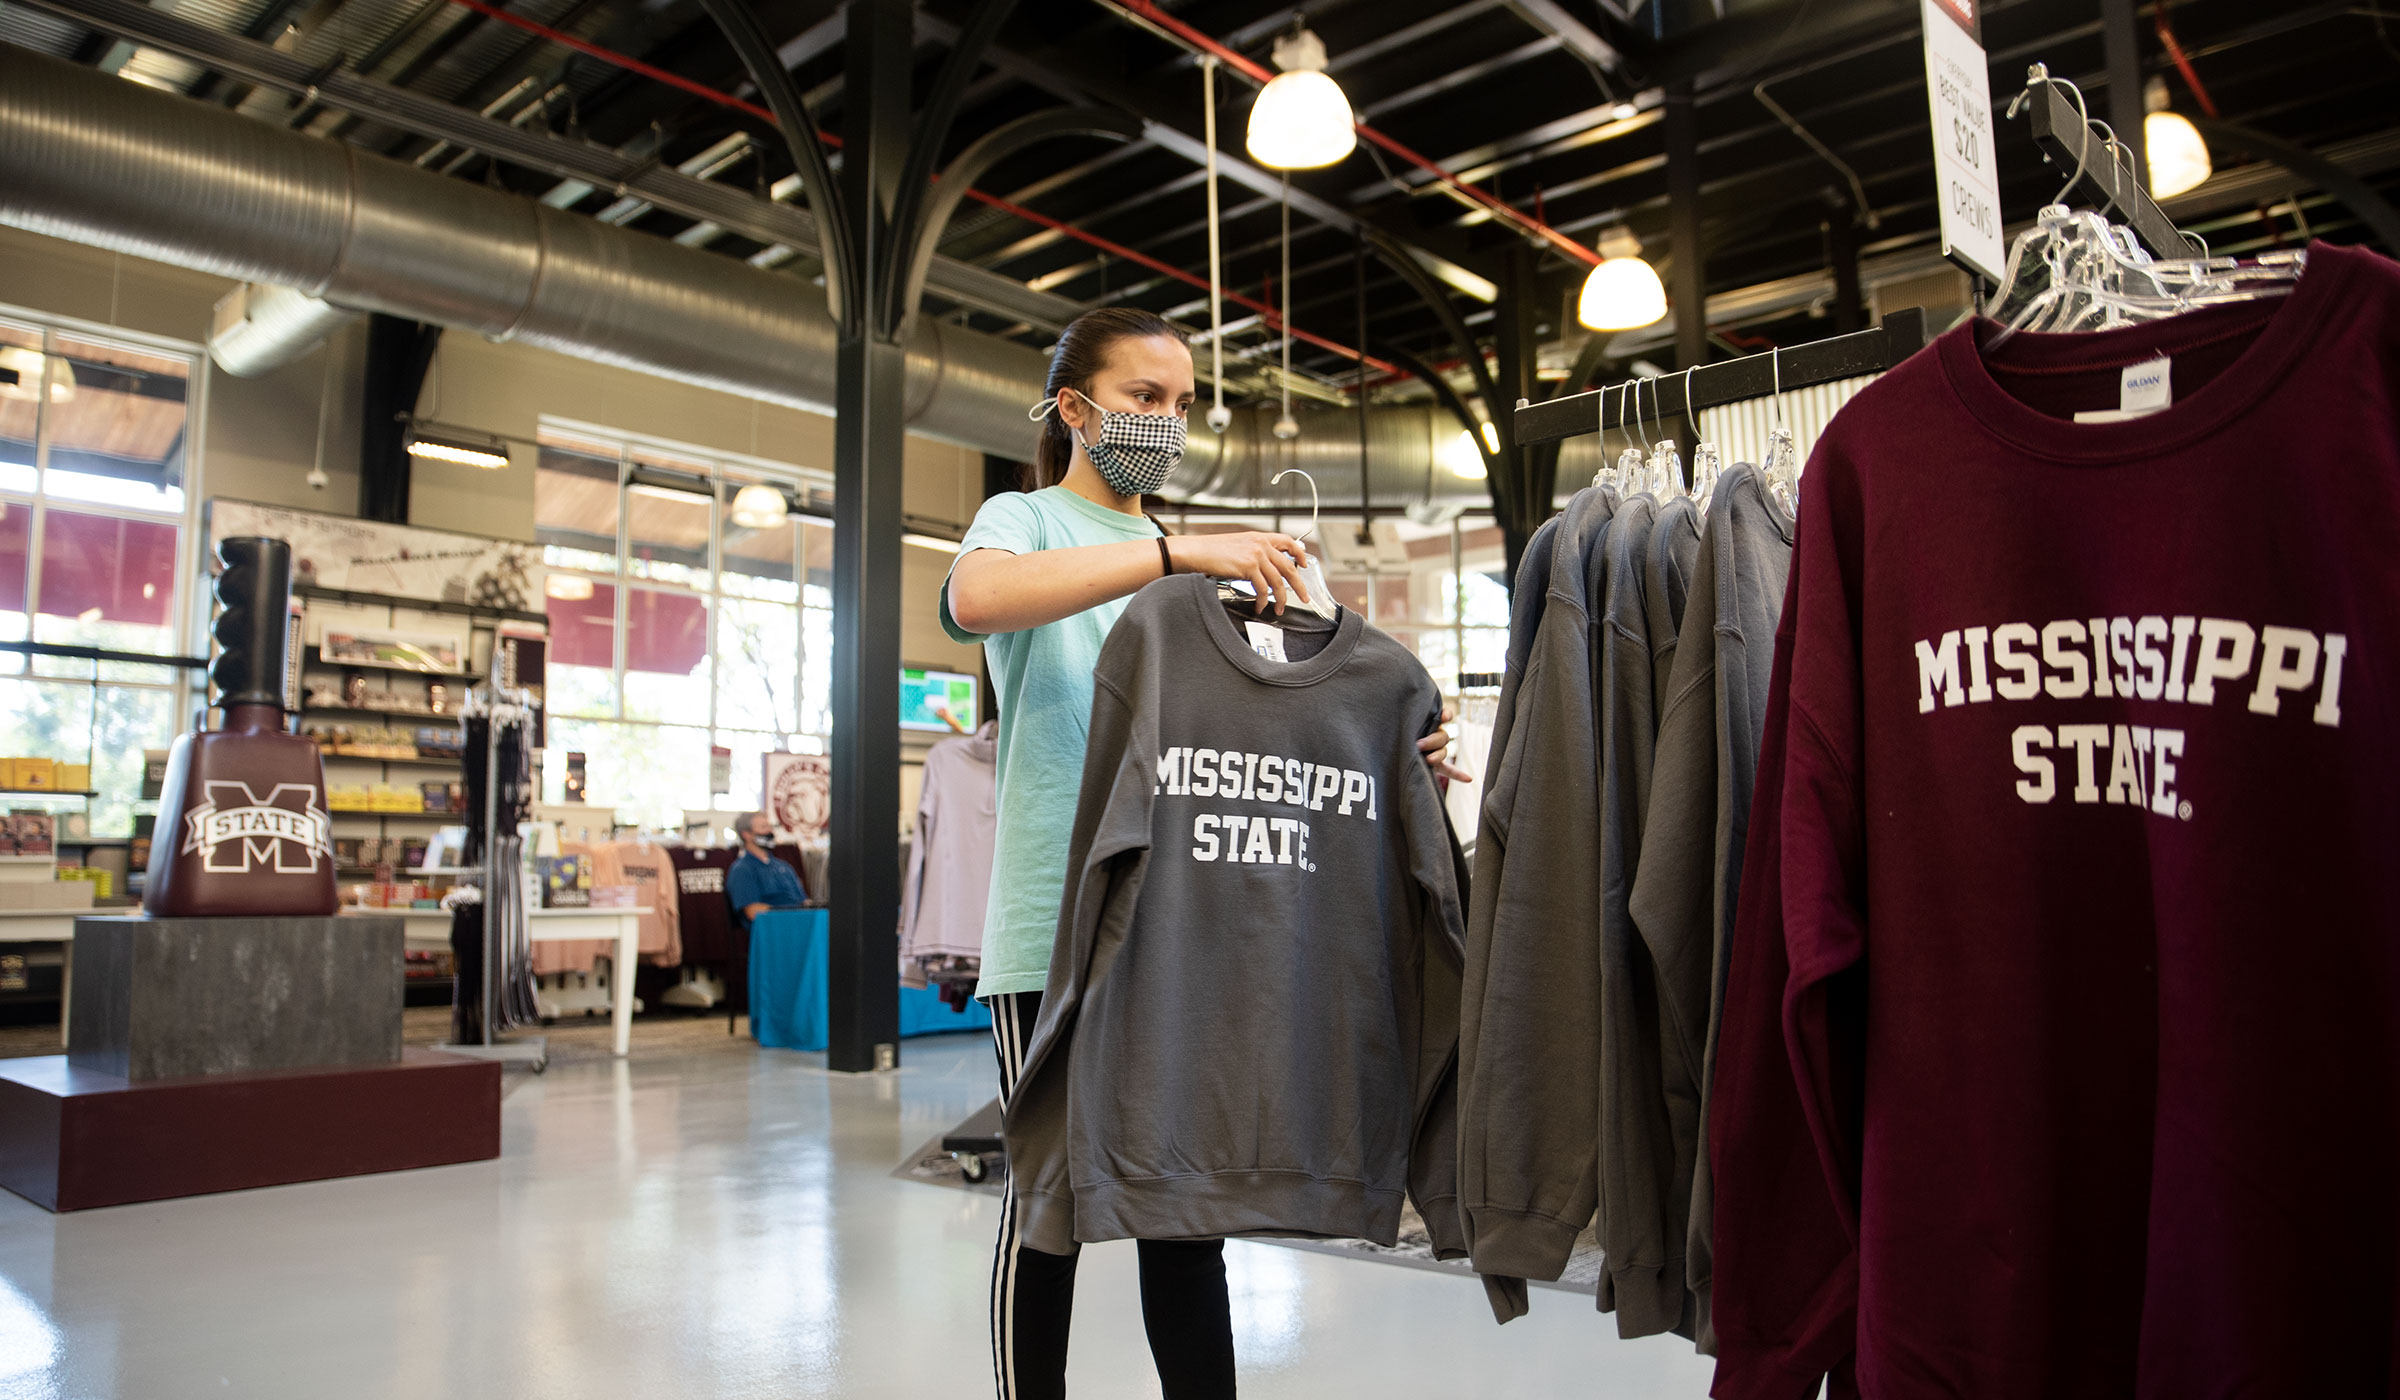 Student McKenna Jacobs broses through Mississippi State sweatshirts at the recently remodelled Barnes &amp; Noble.